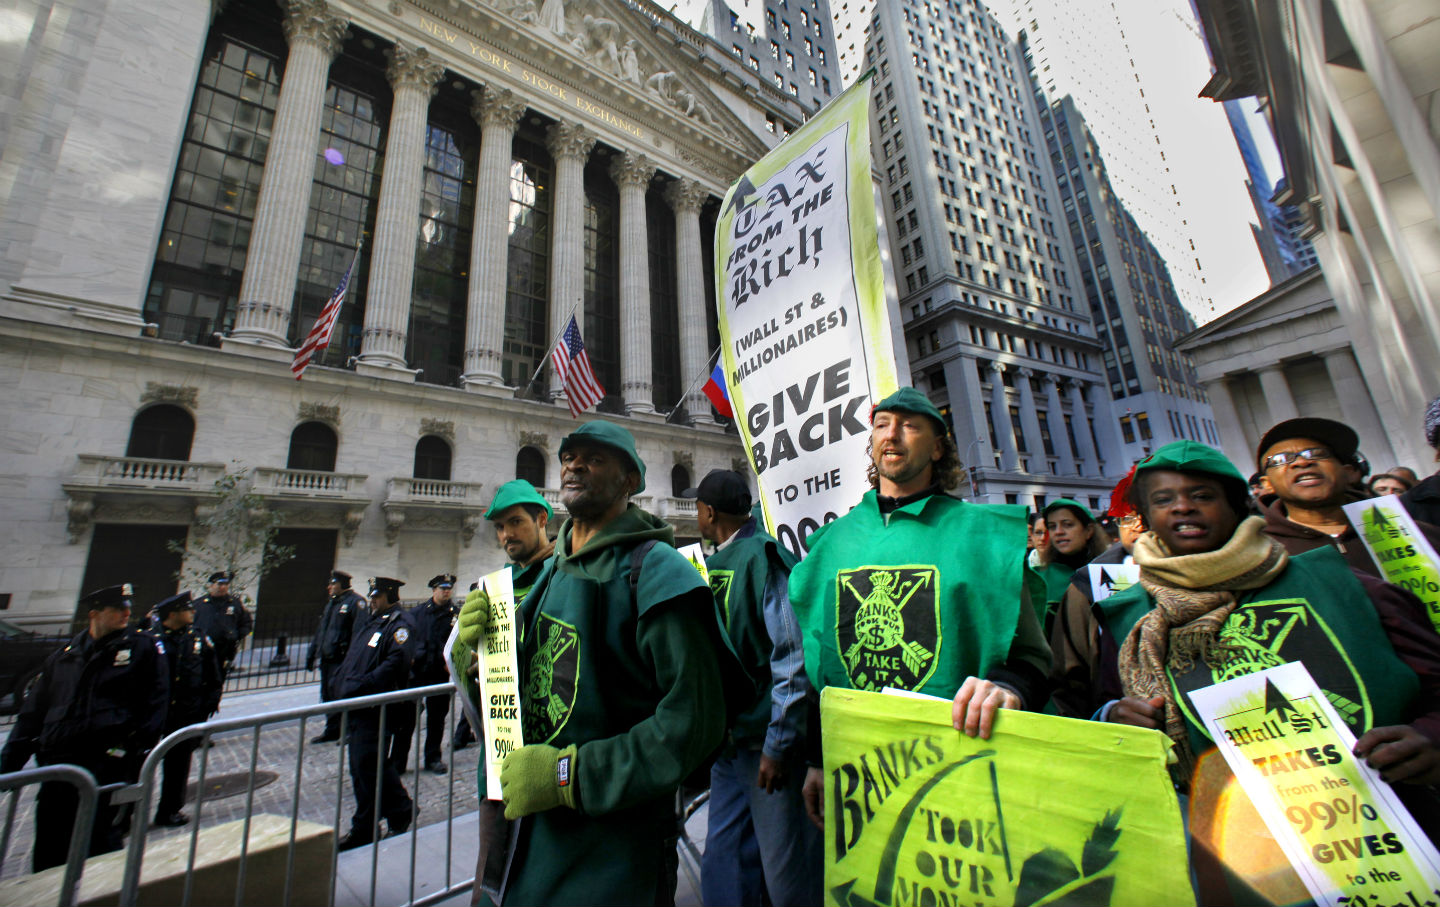 Will Connecticut Go Robin Hood on Low-Wage Bosses?